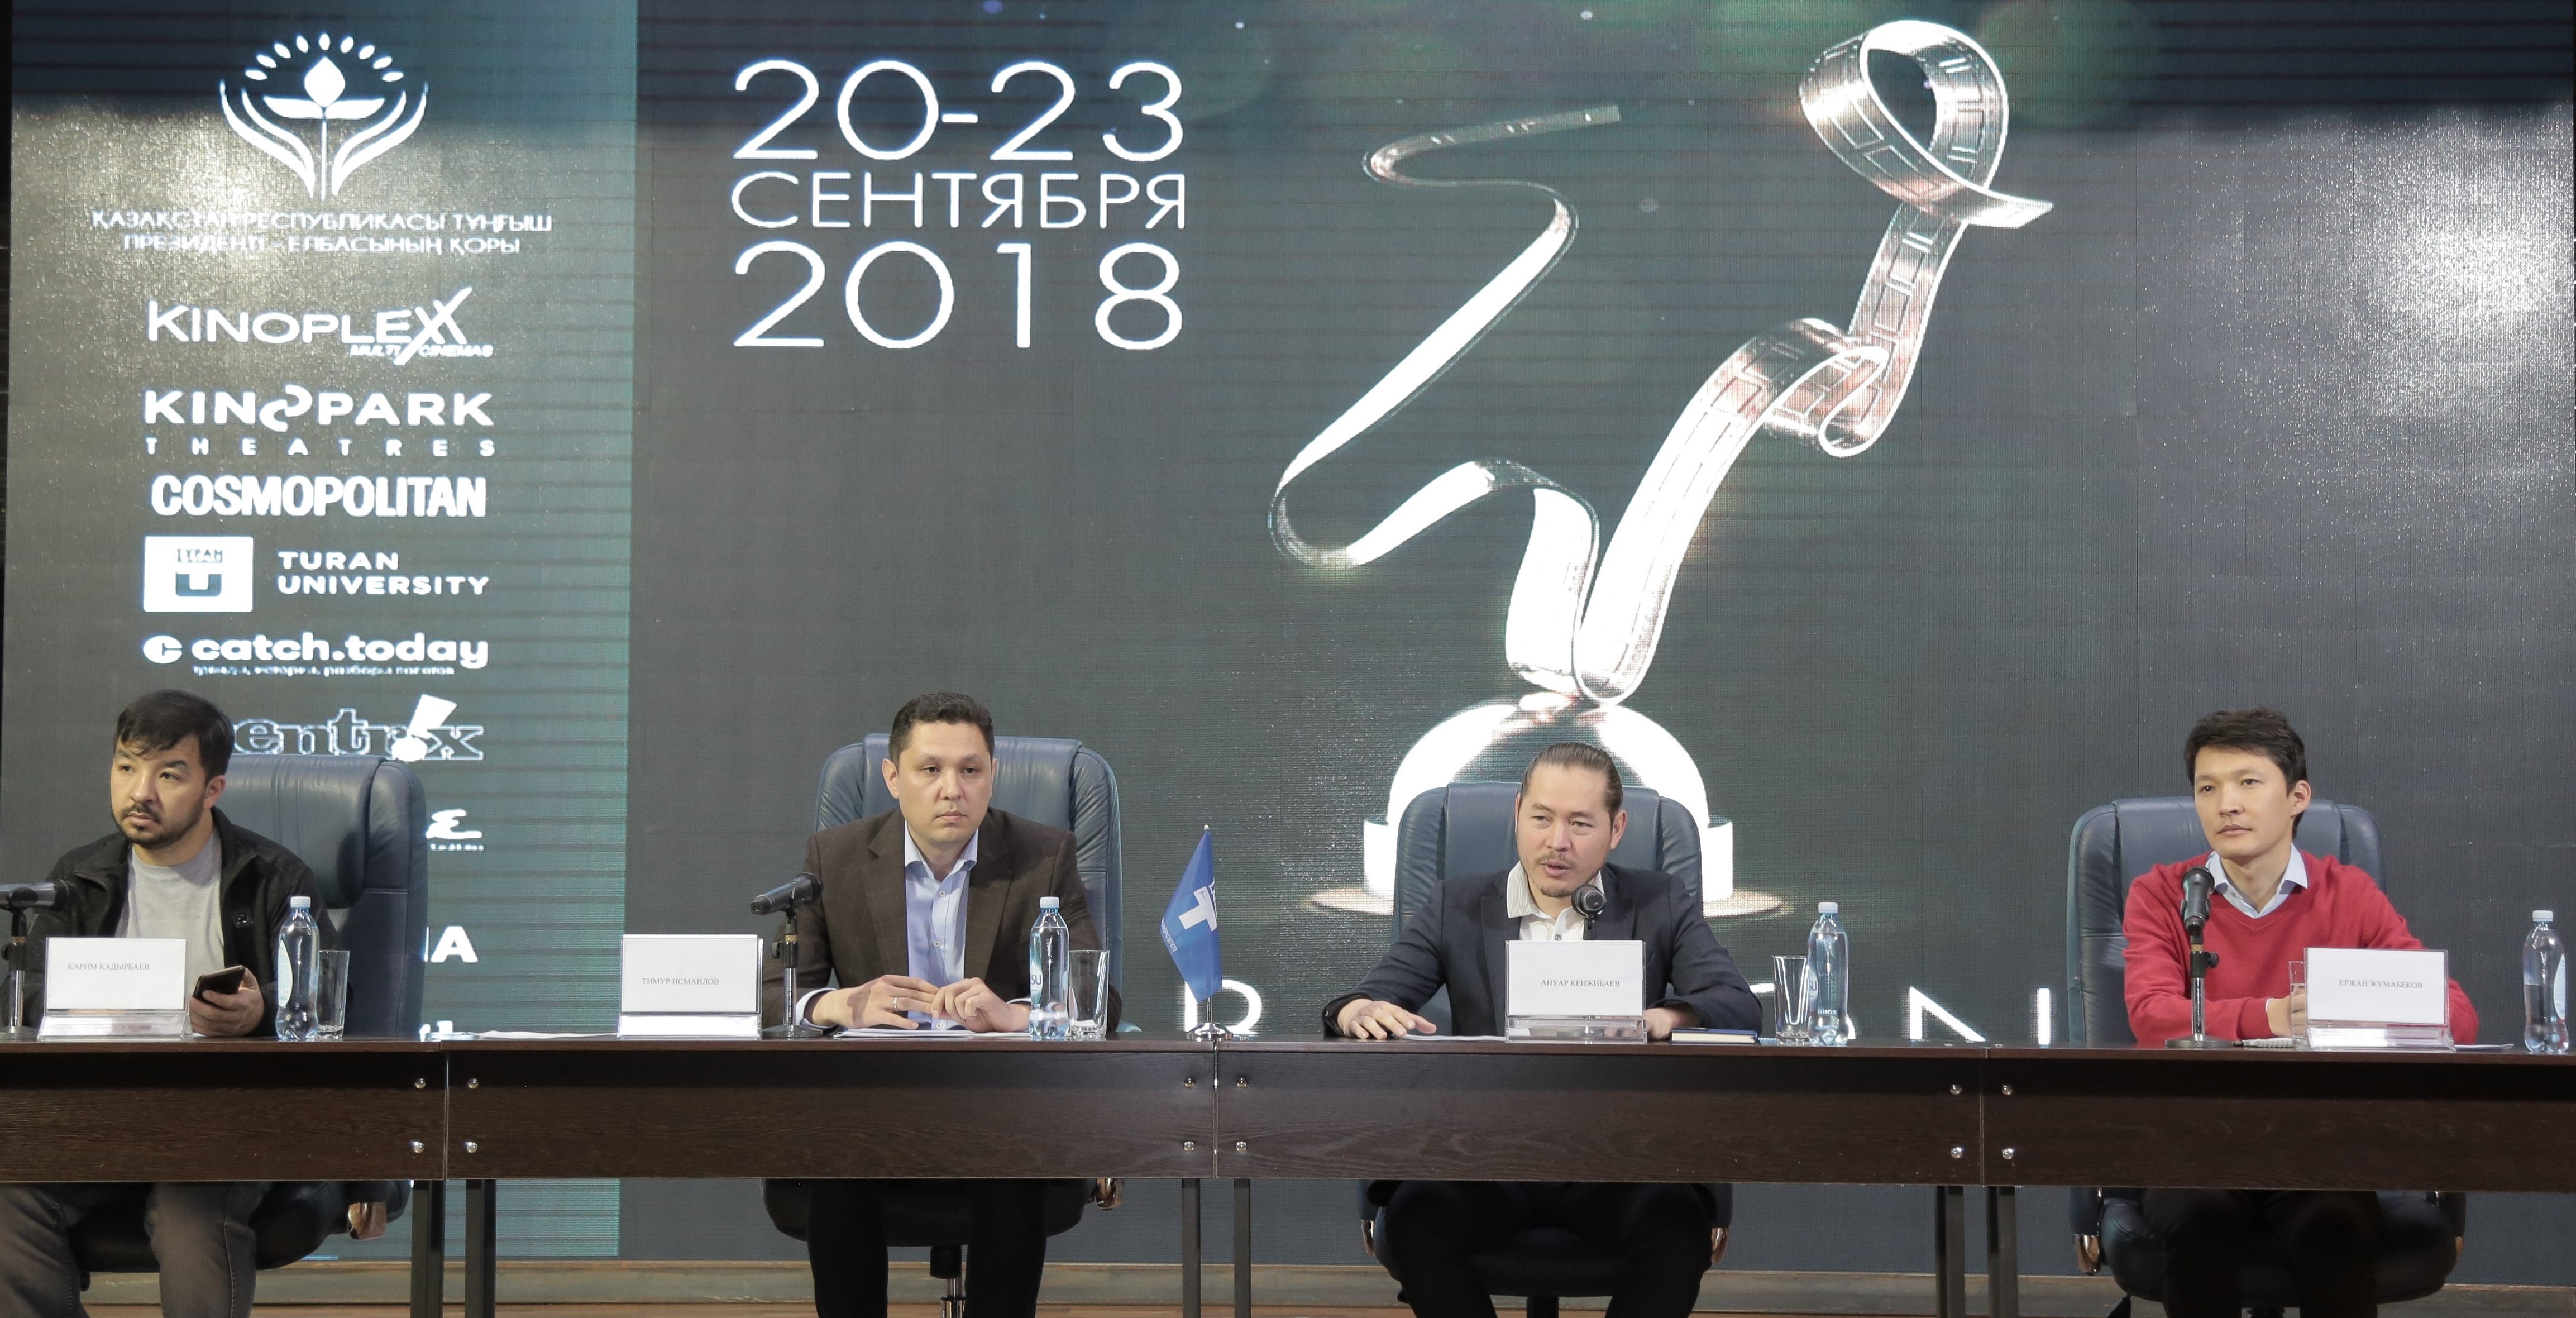 Almaty hosted the press conference of the III Baiqonyr Short Film Festival